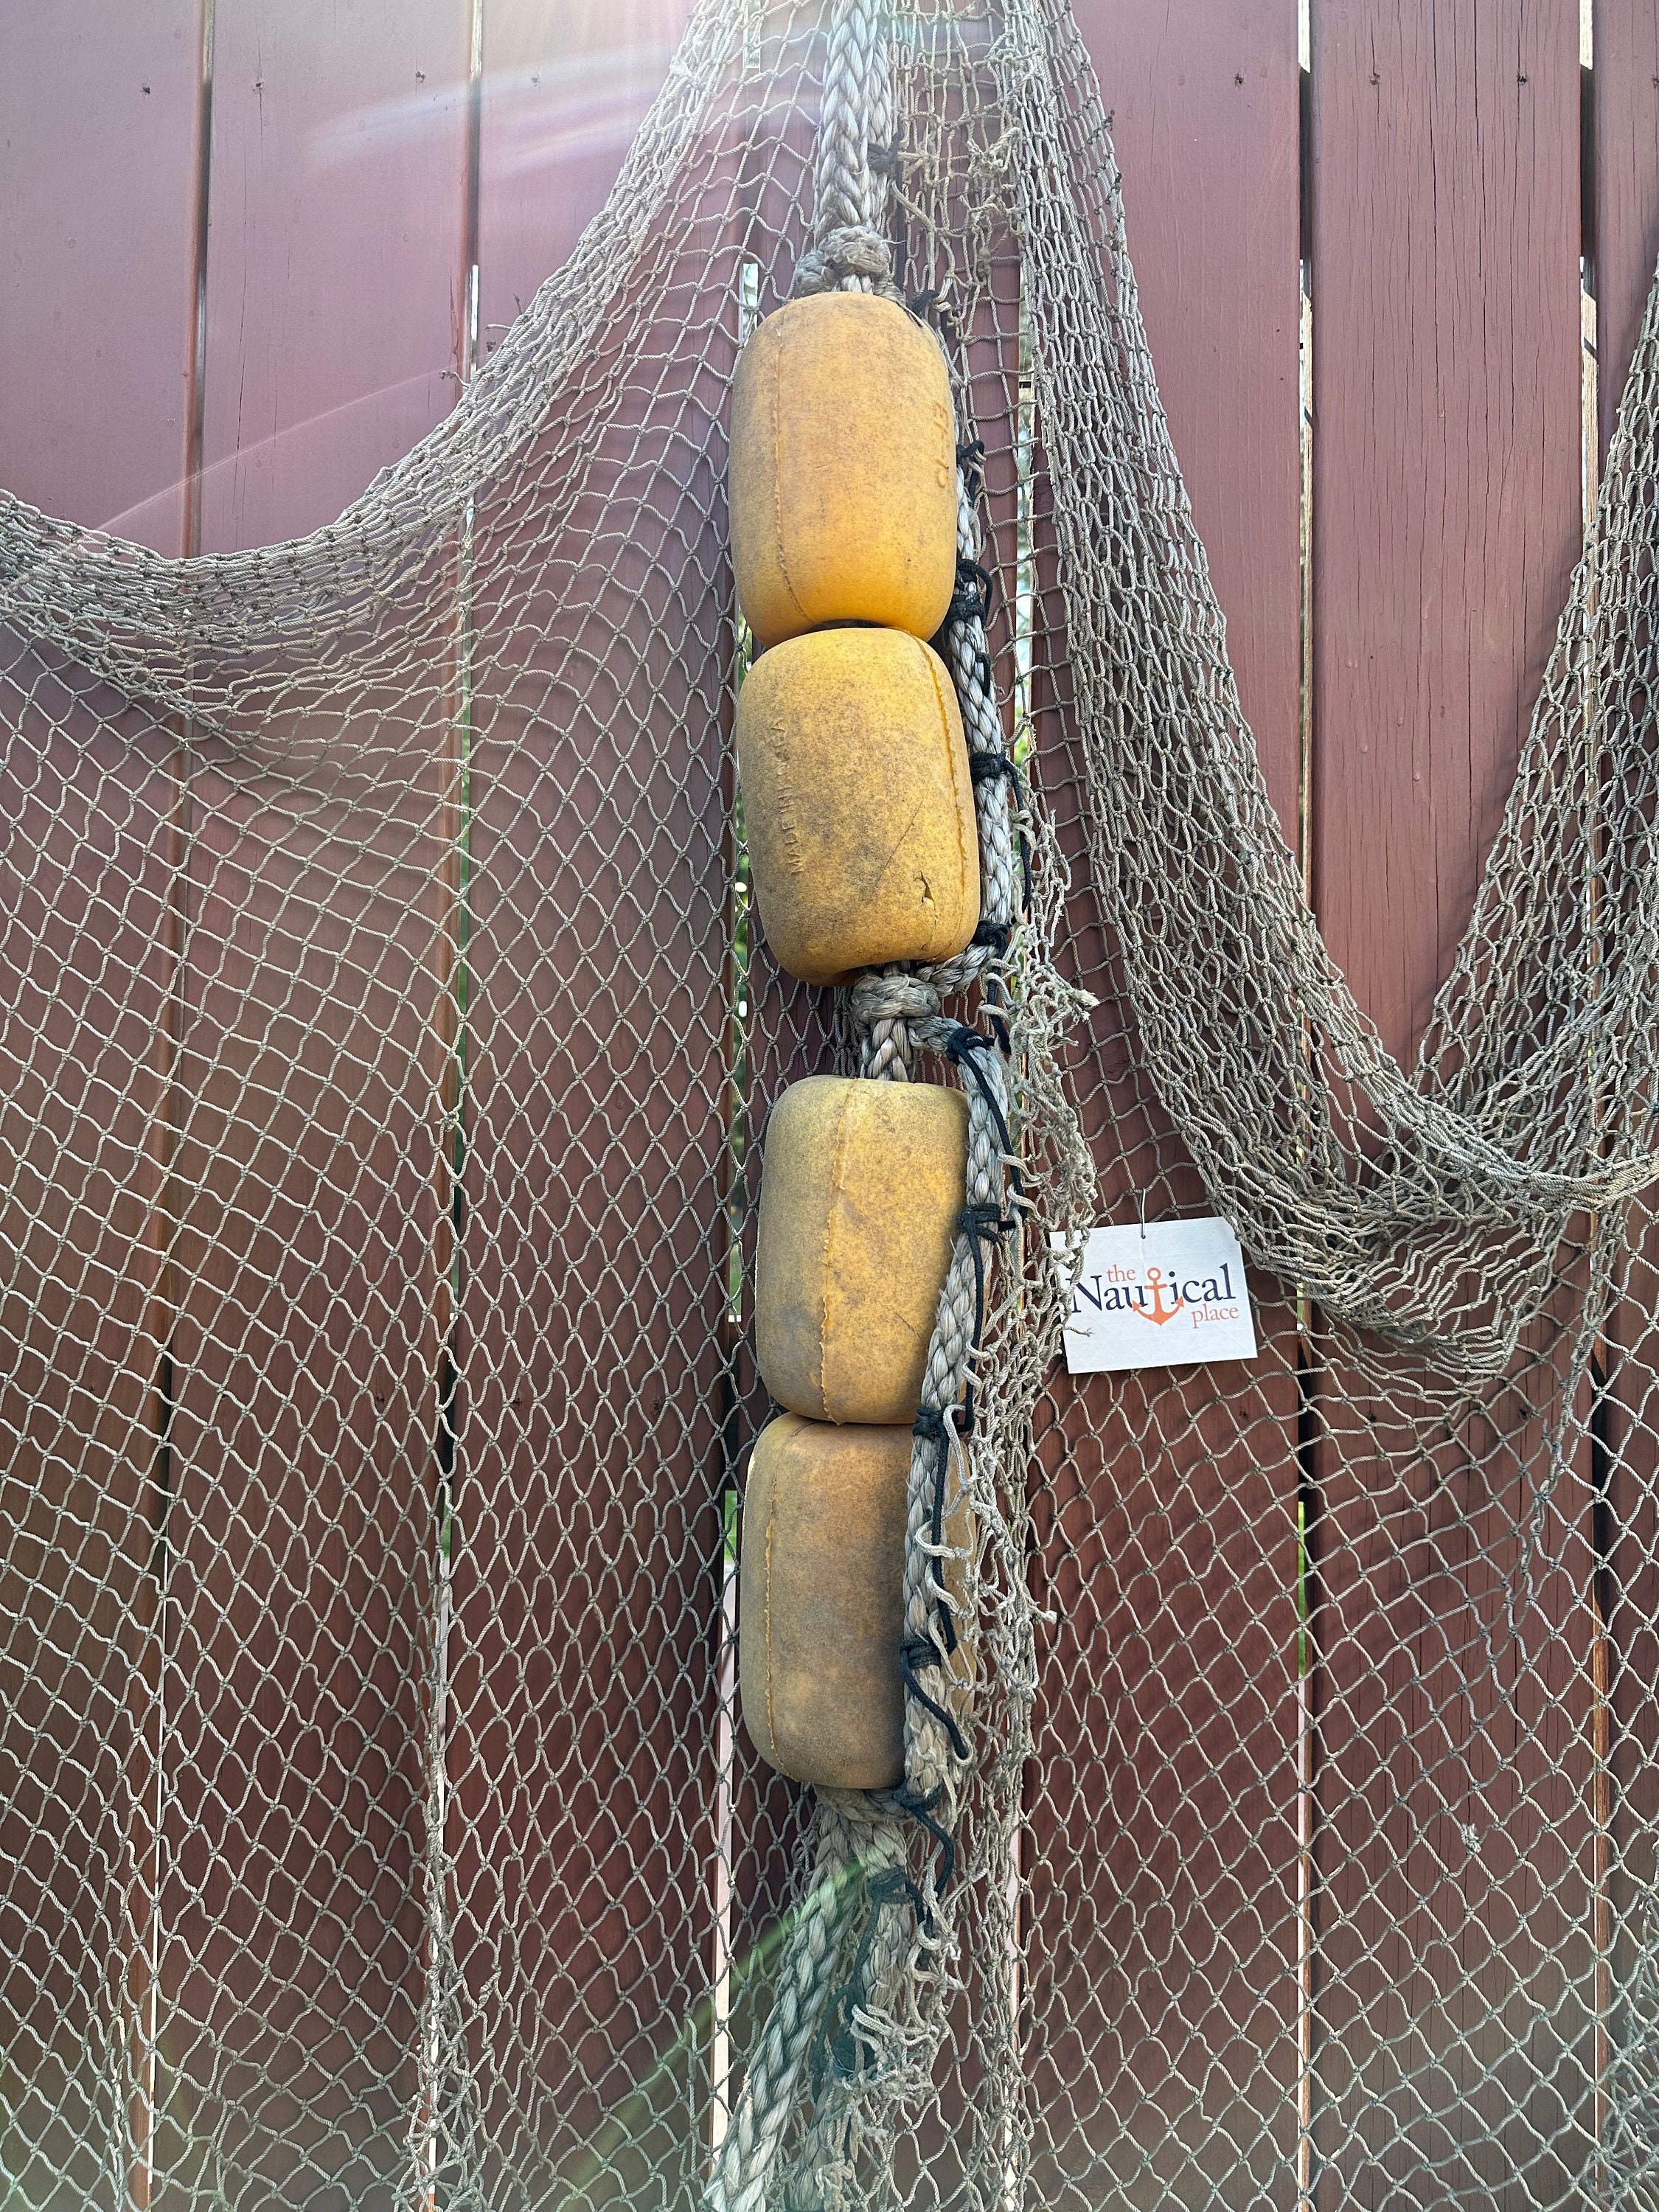 Authentic Used Fishing Net Floats on Rope 42 Long, Set of 4 Reclaimed From  Commercial Fish Netting Old Buoys, Nautical Decor -  Singapore